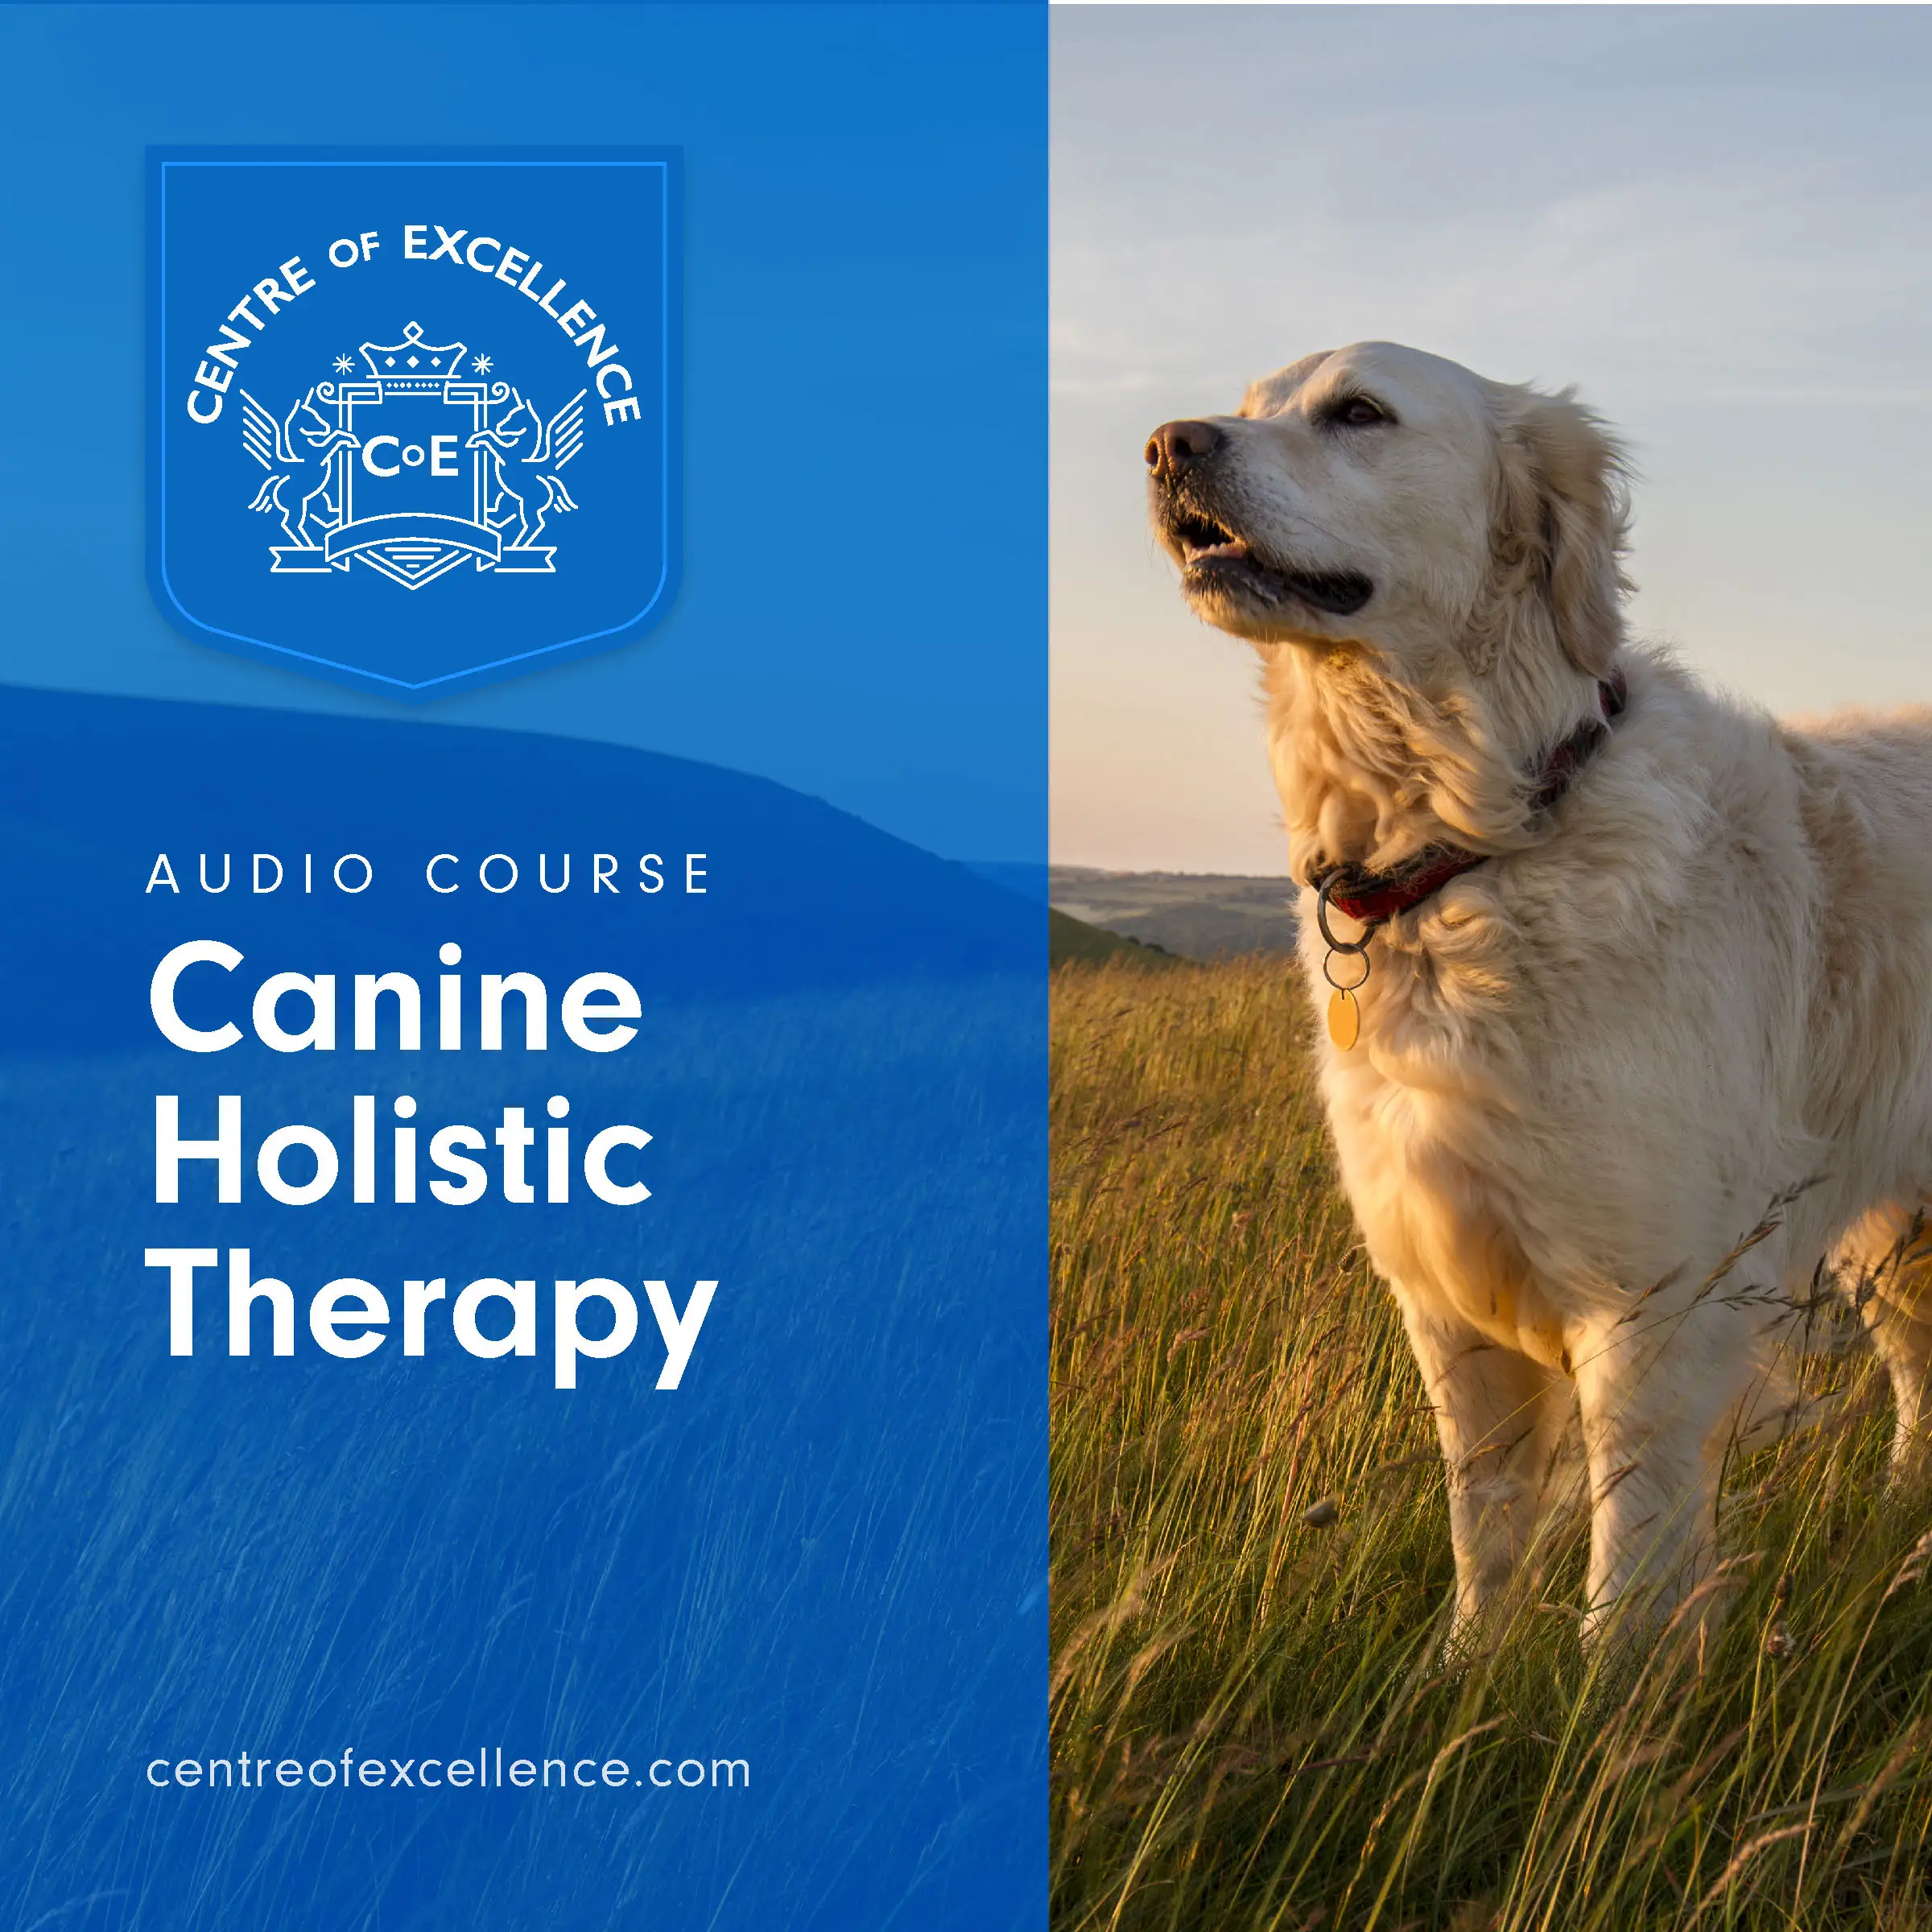 Canine Holistic Therapy Audiobook by Centre of Excellence